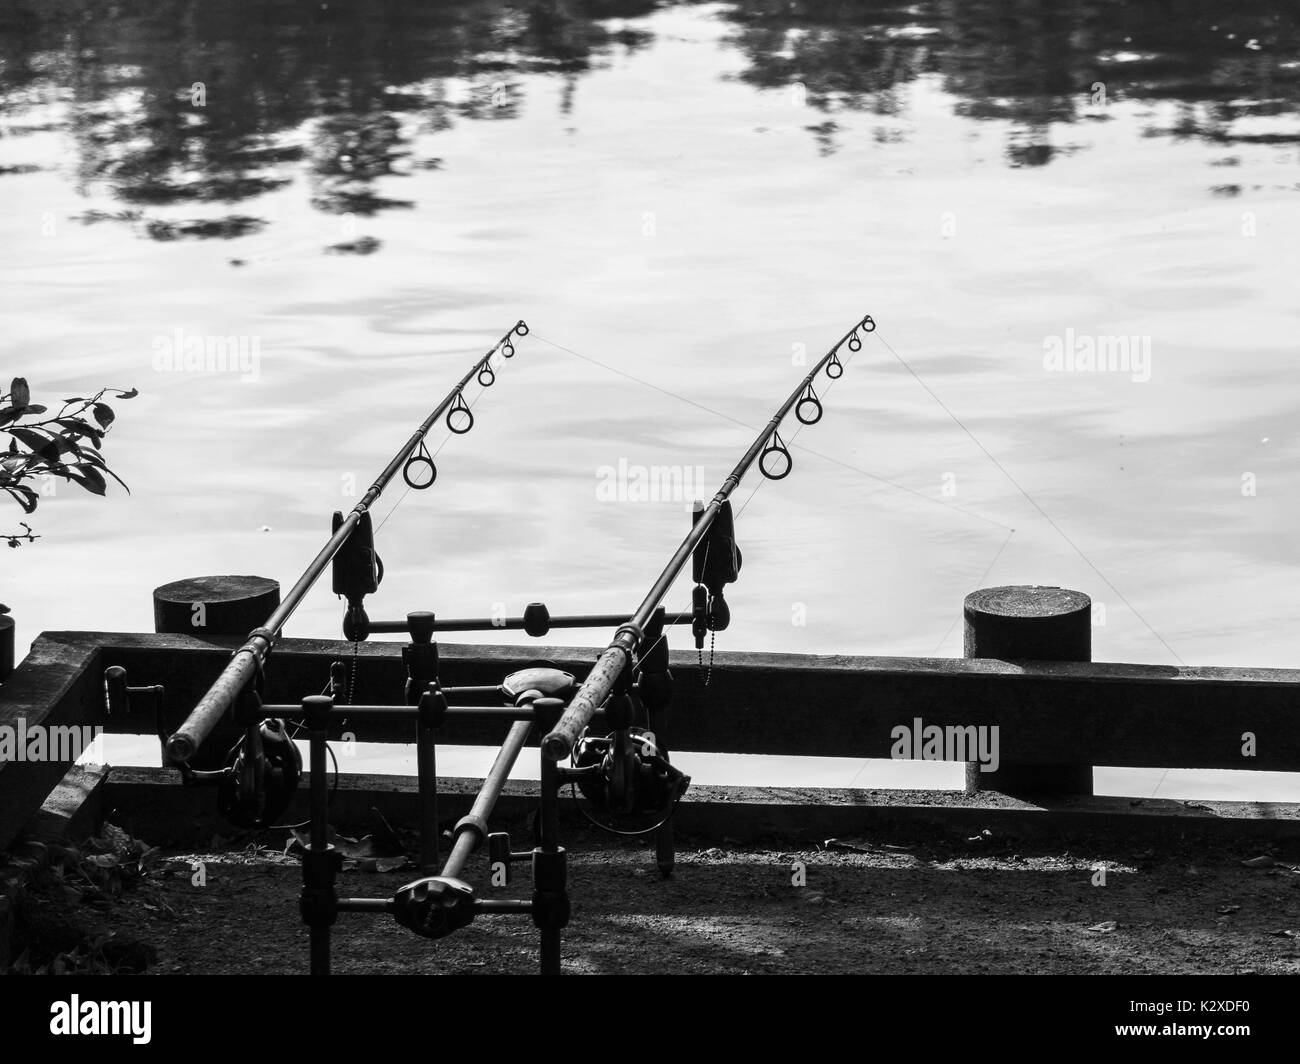 Water reels Black and White Stock Photos & Images - Alamy